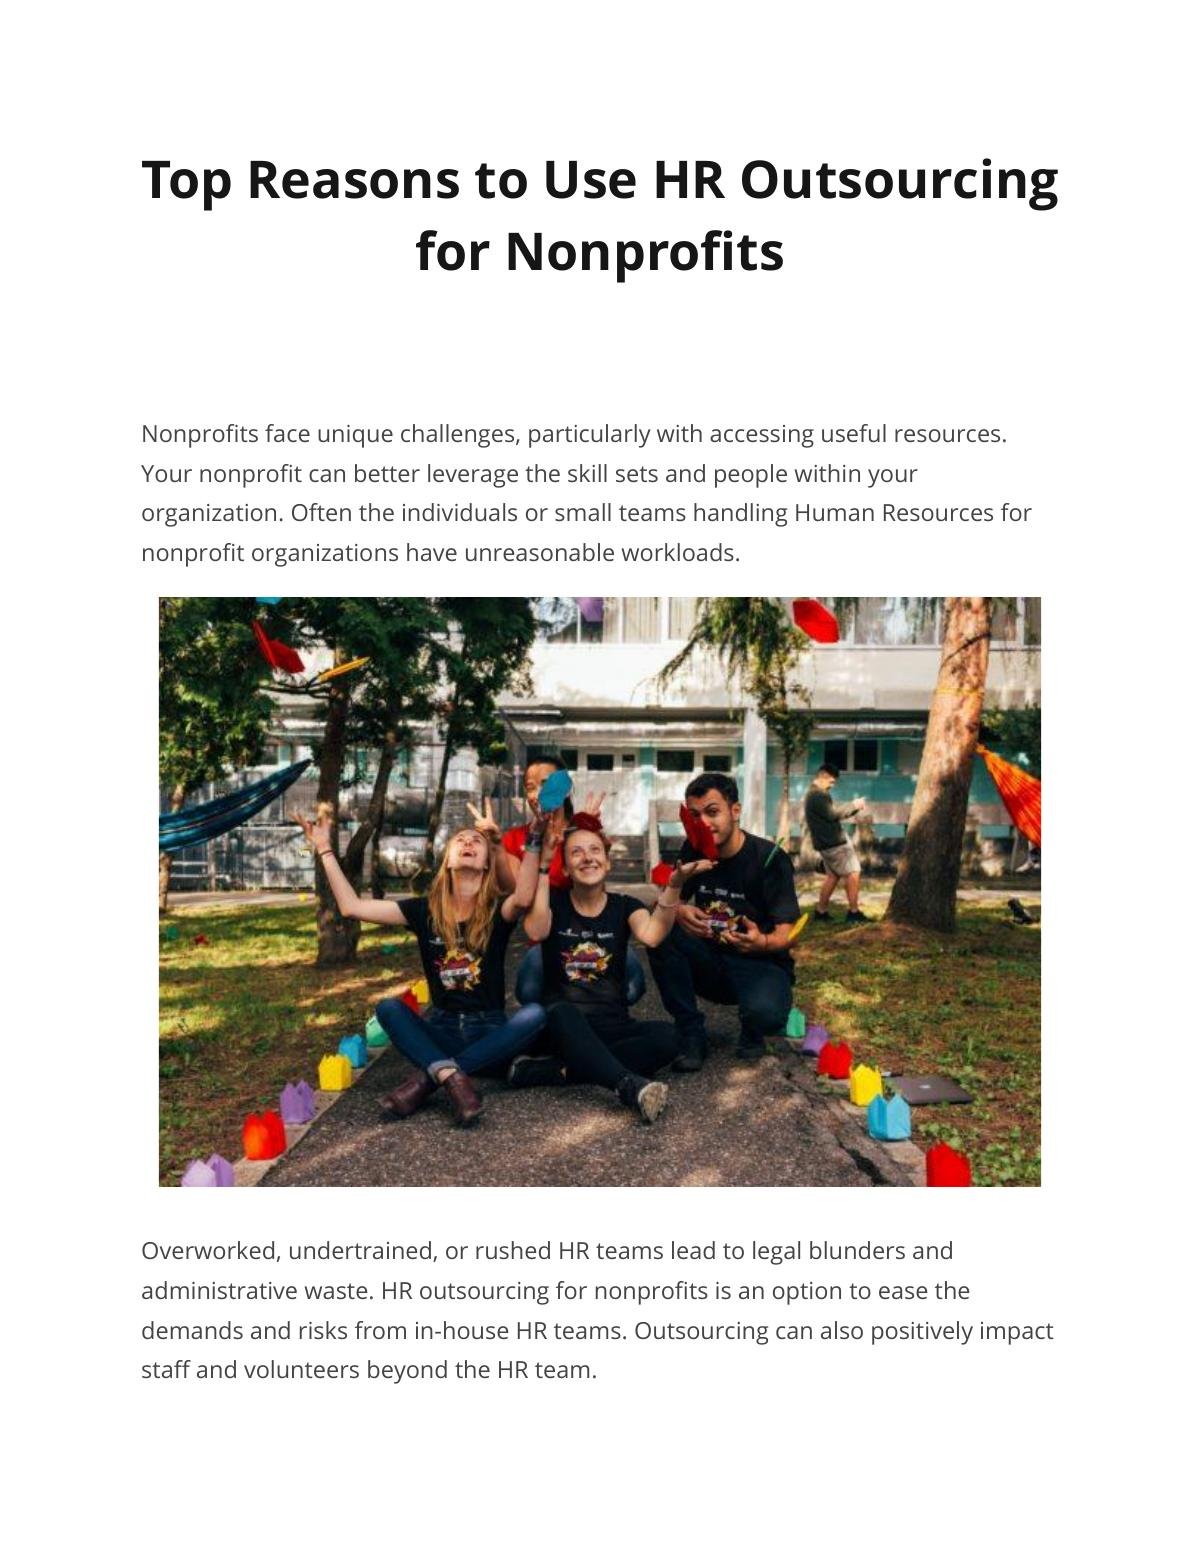 Top Reasons to Use HR Outsourcing for Nonprofits 